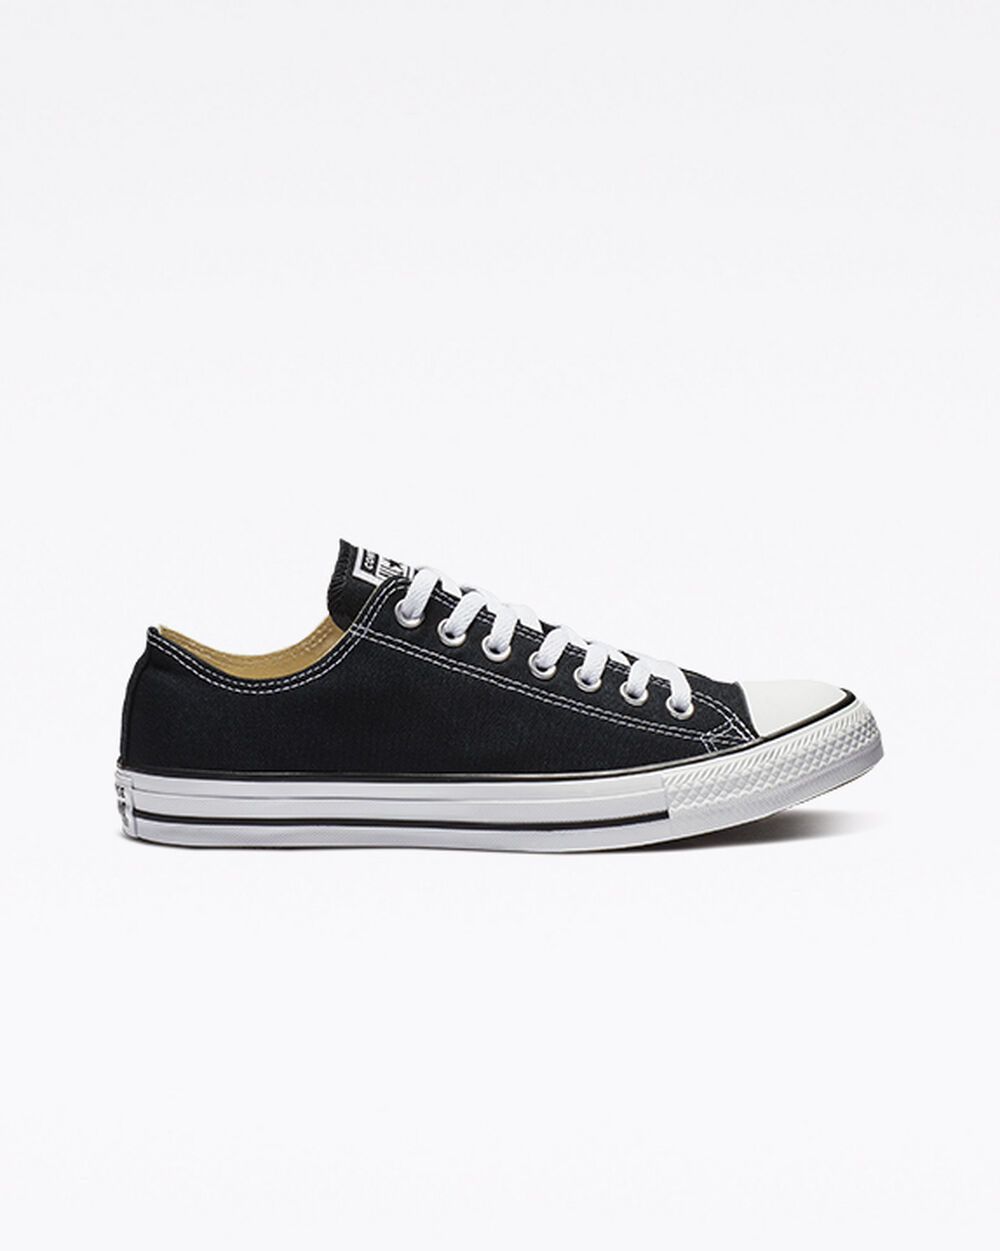 Tenis Converse Chuck Taylor All Star Mujer Negros | Mexico-452016